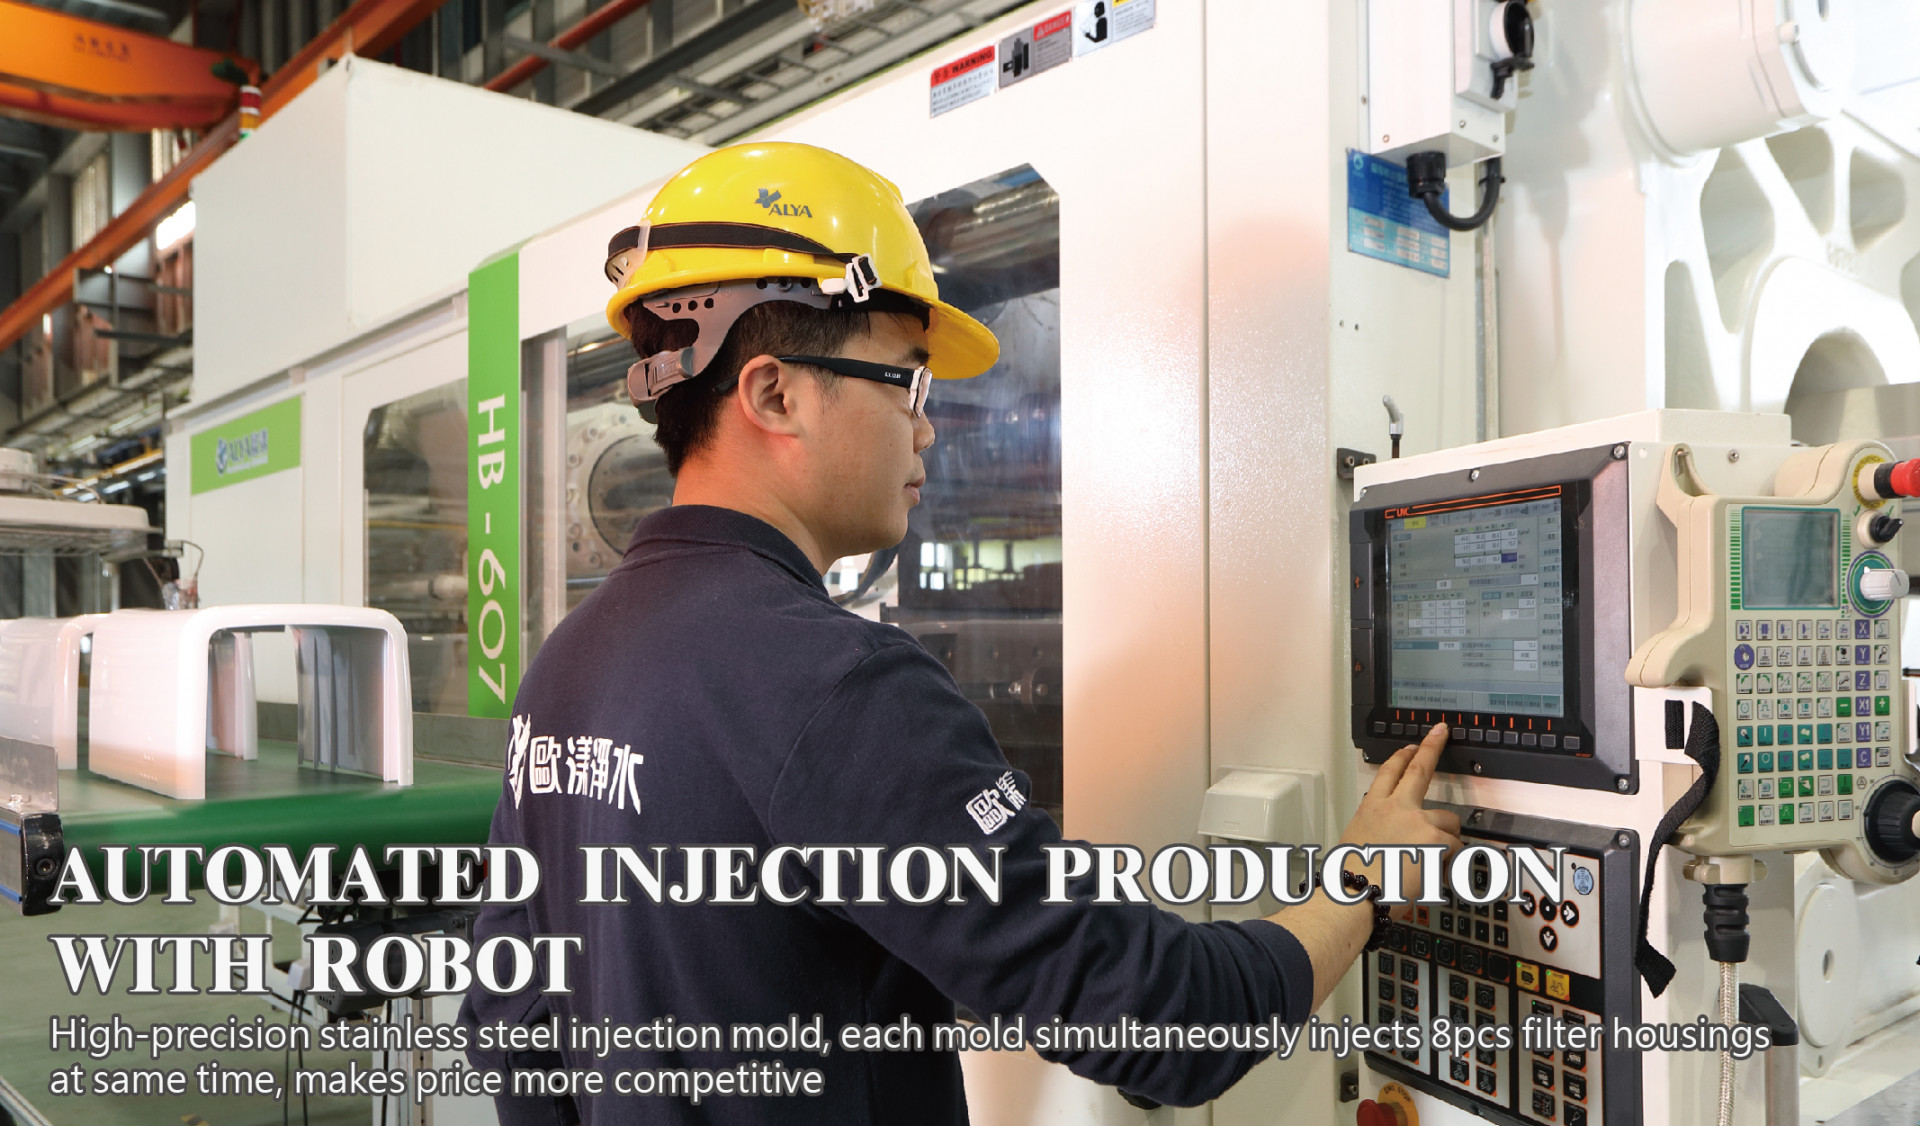 FILTER AUTOMATED INJECTION PRODUCTION WITH ROBOT